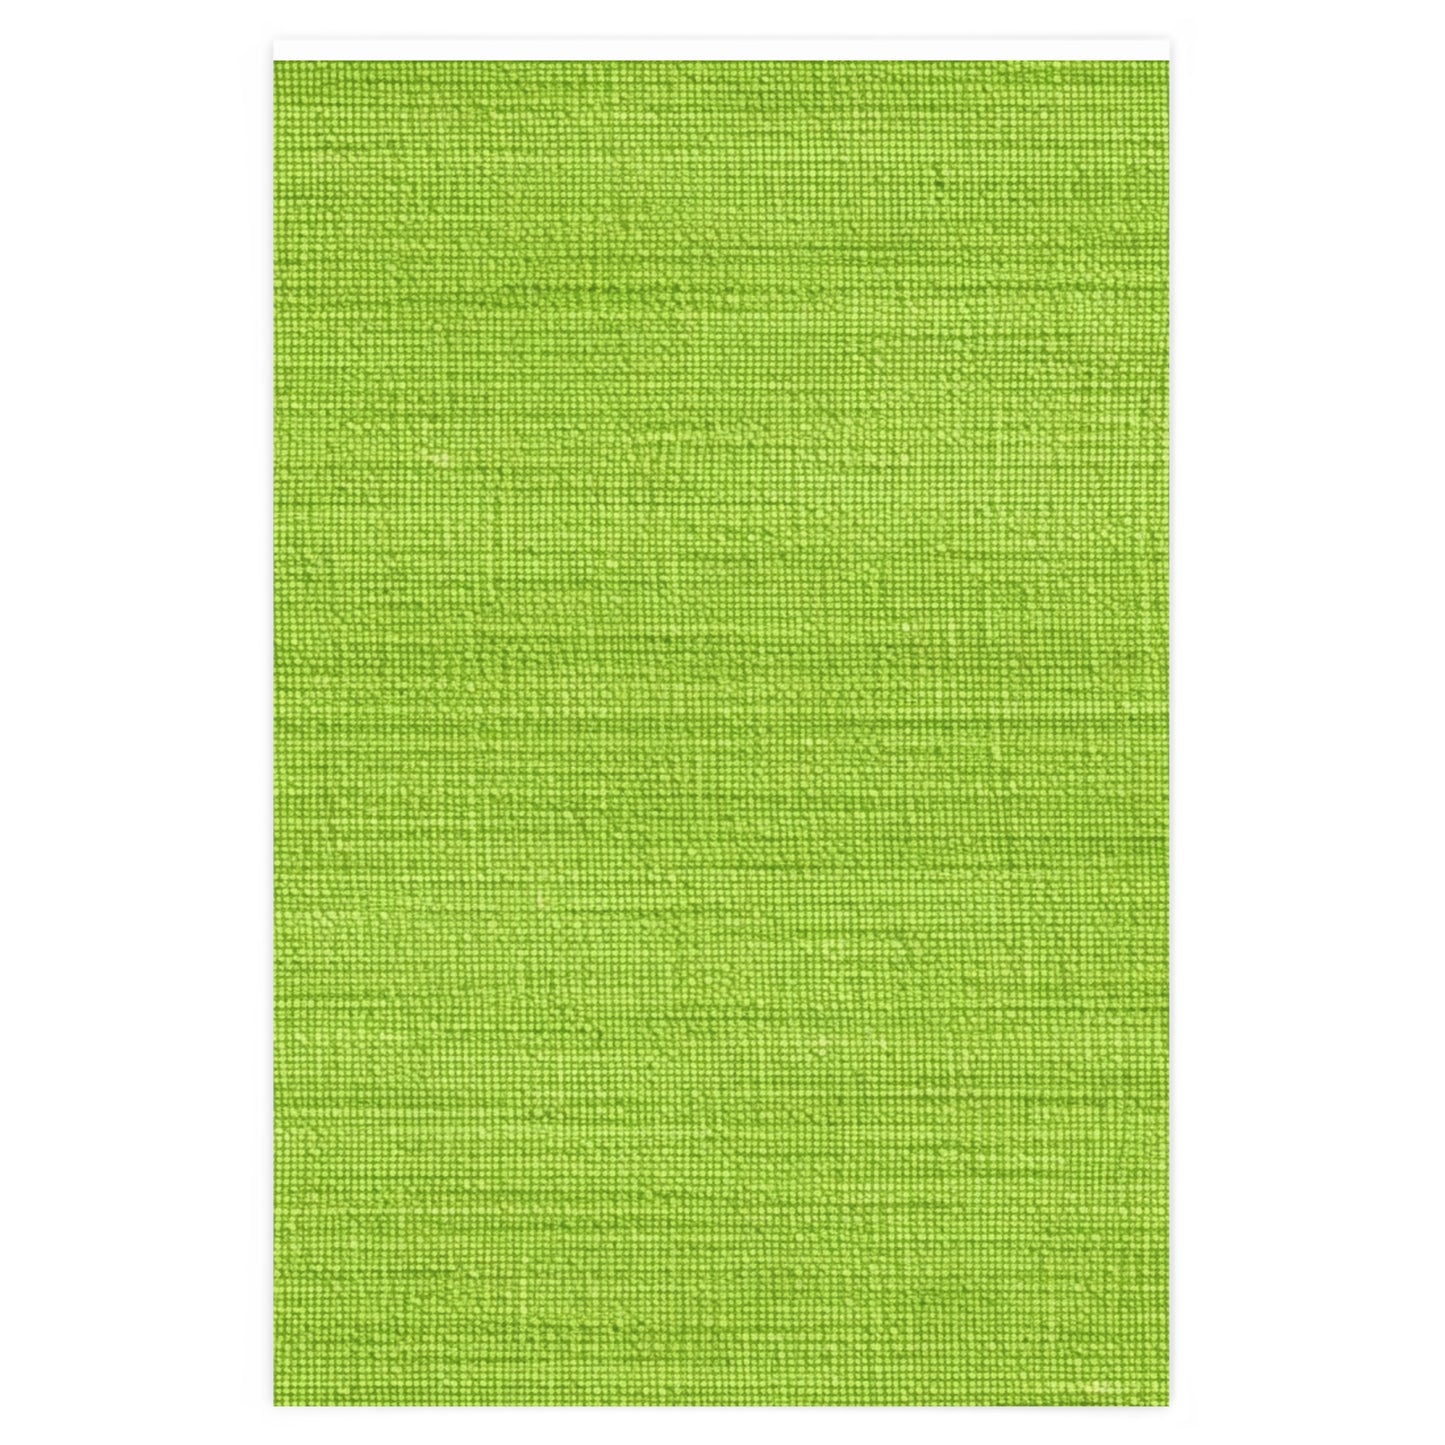 Lush Grass Neon Green: Denim-Inspired, Springtime Fabric Style - Wrapping Paper